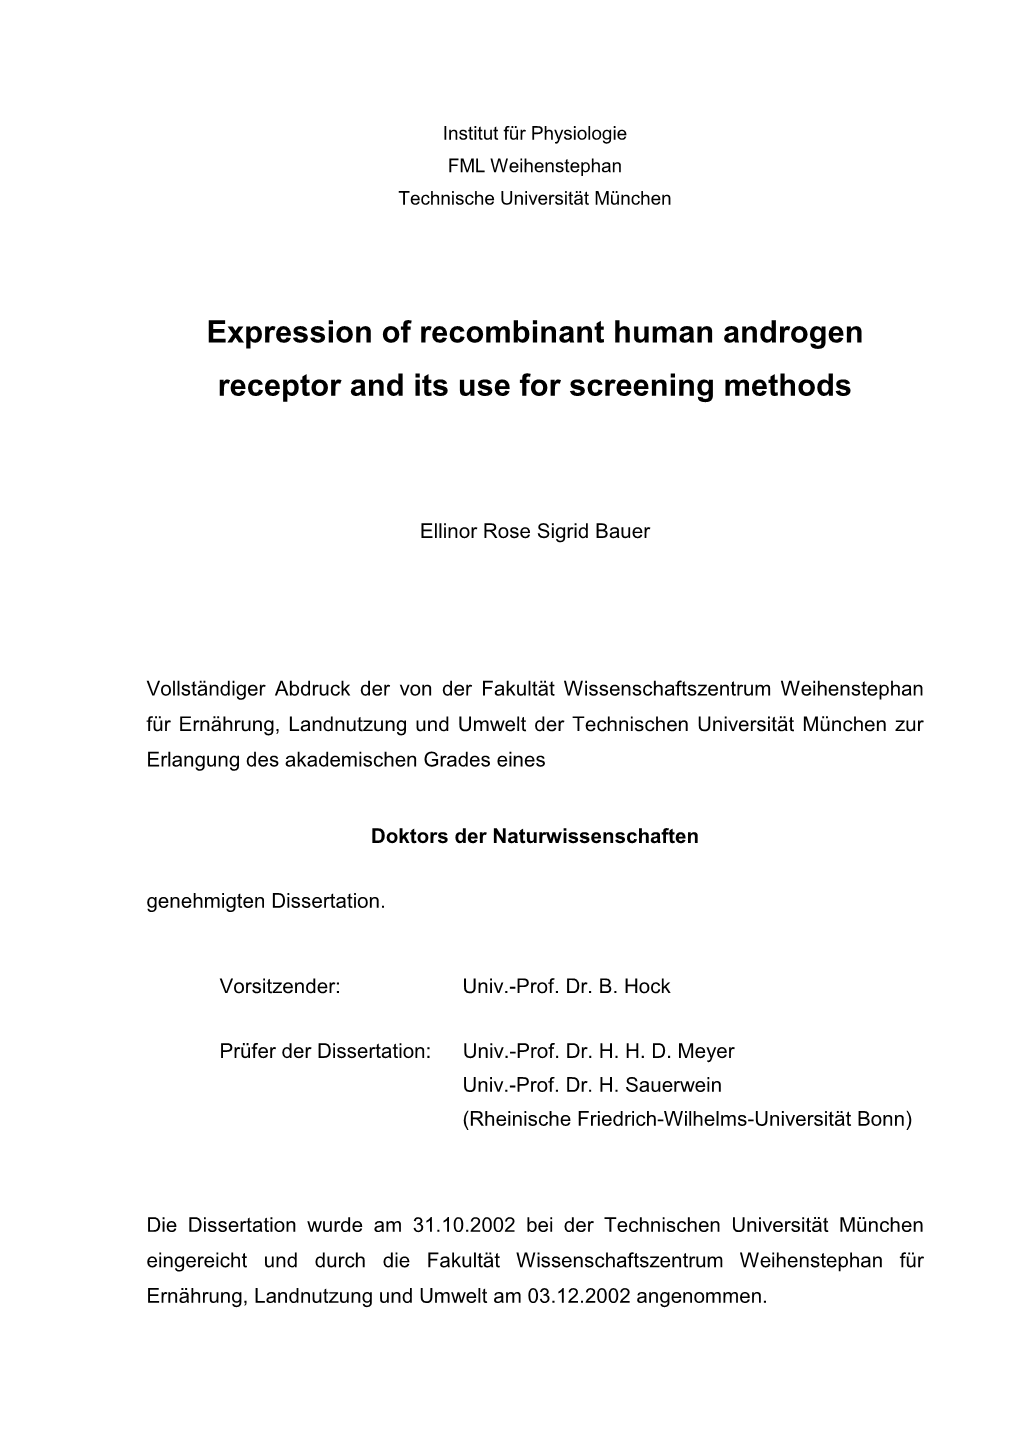 Expression of Recombinant Human Androgen Receptor and Its Use for Screening Methods